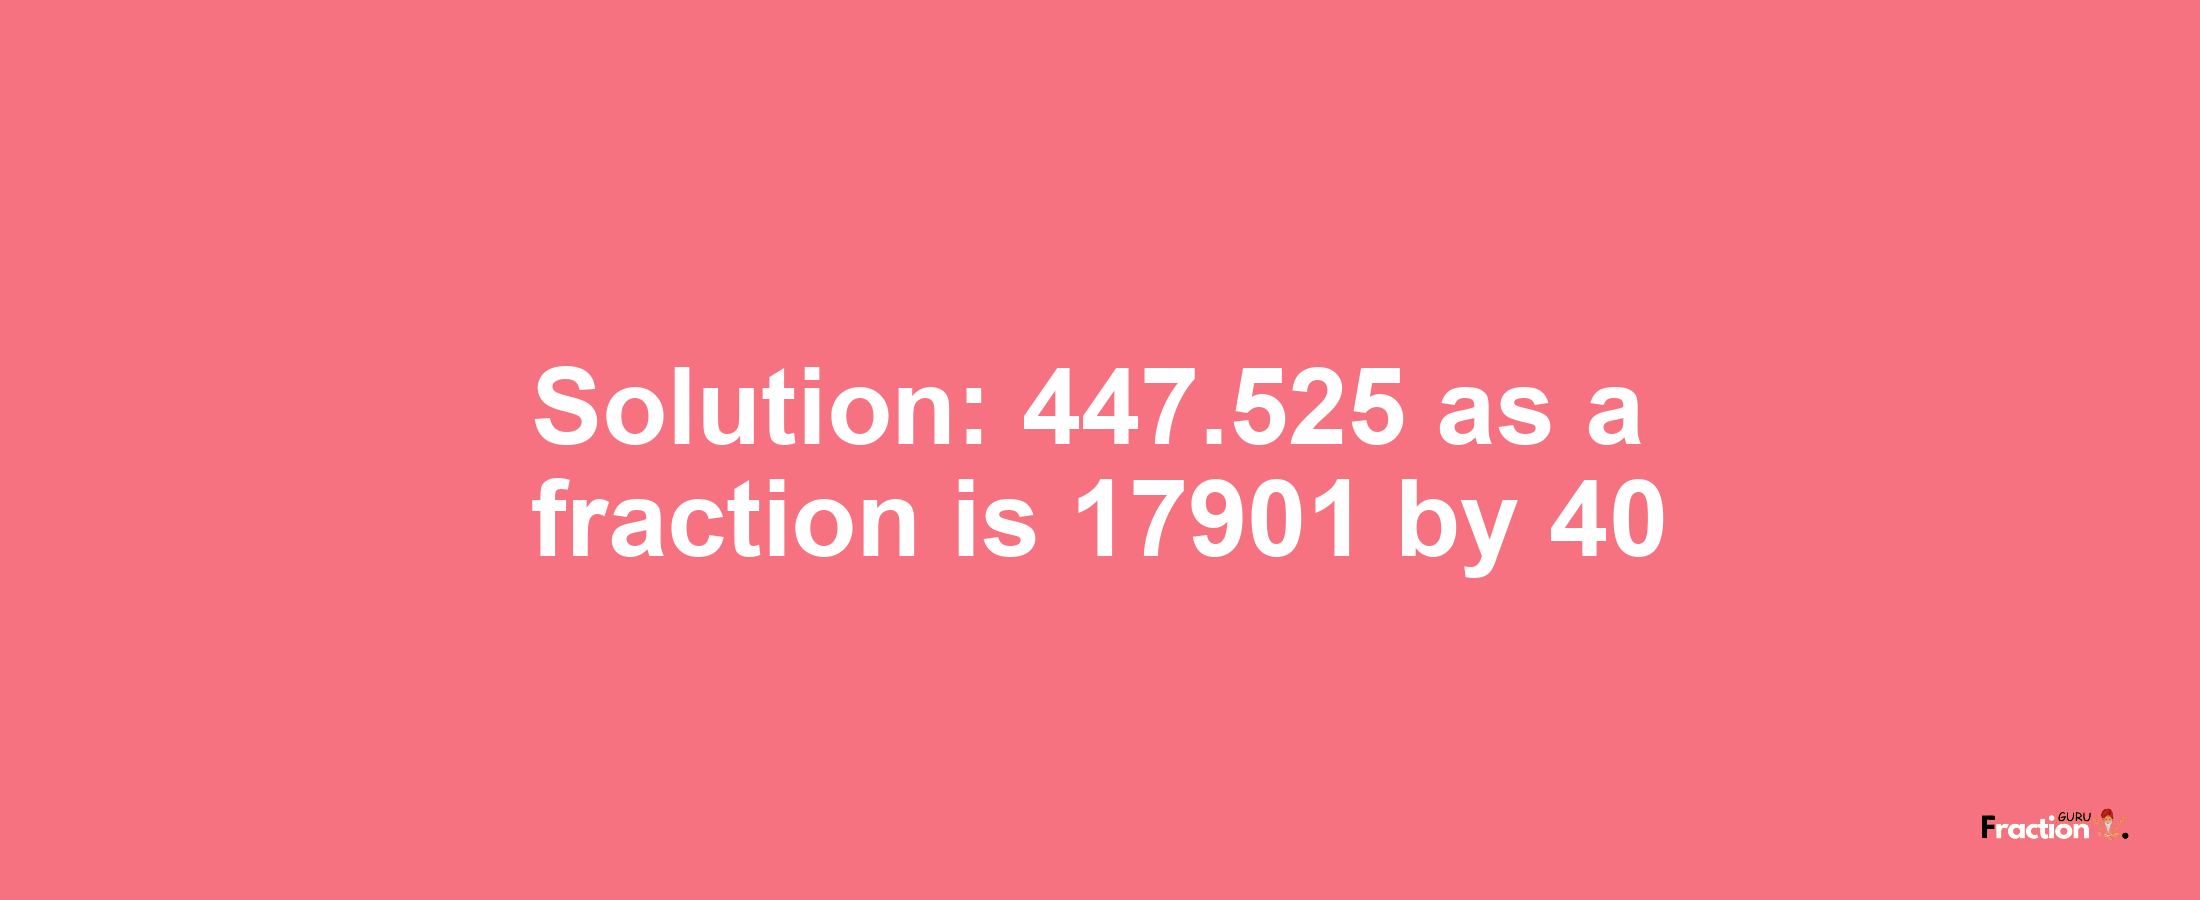 Solution:447.525 as a fraction is 17901/40